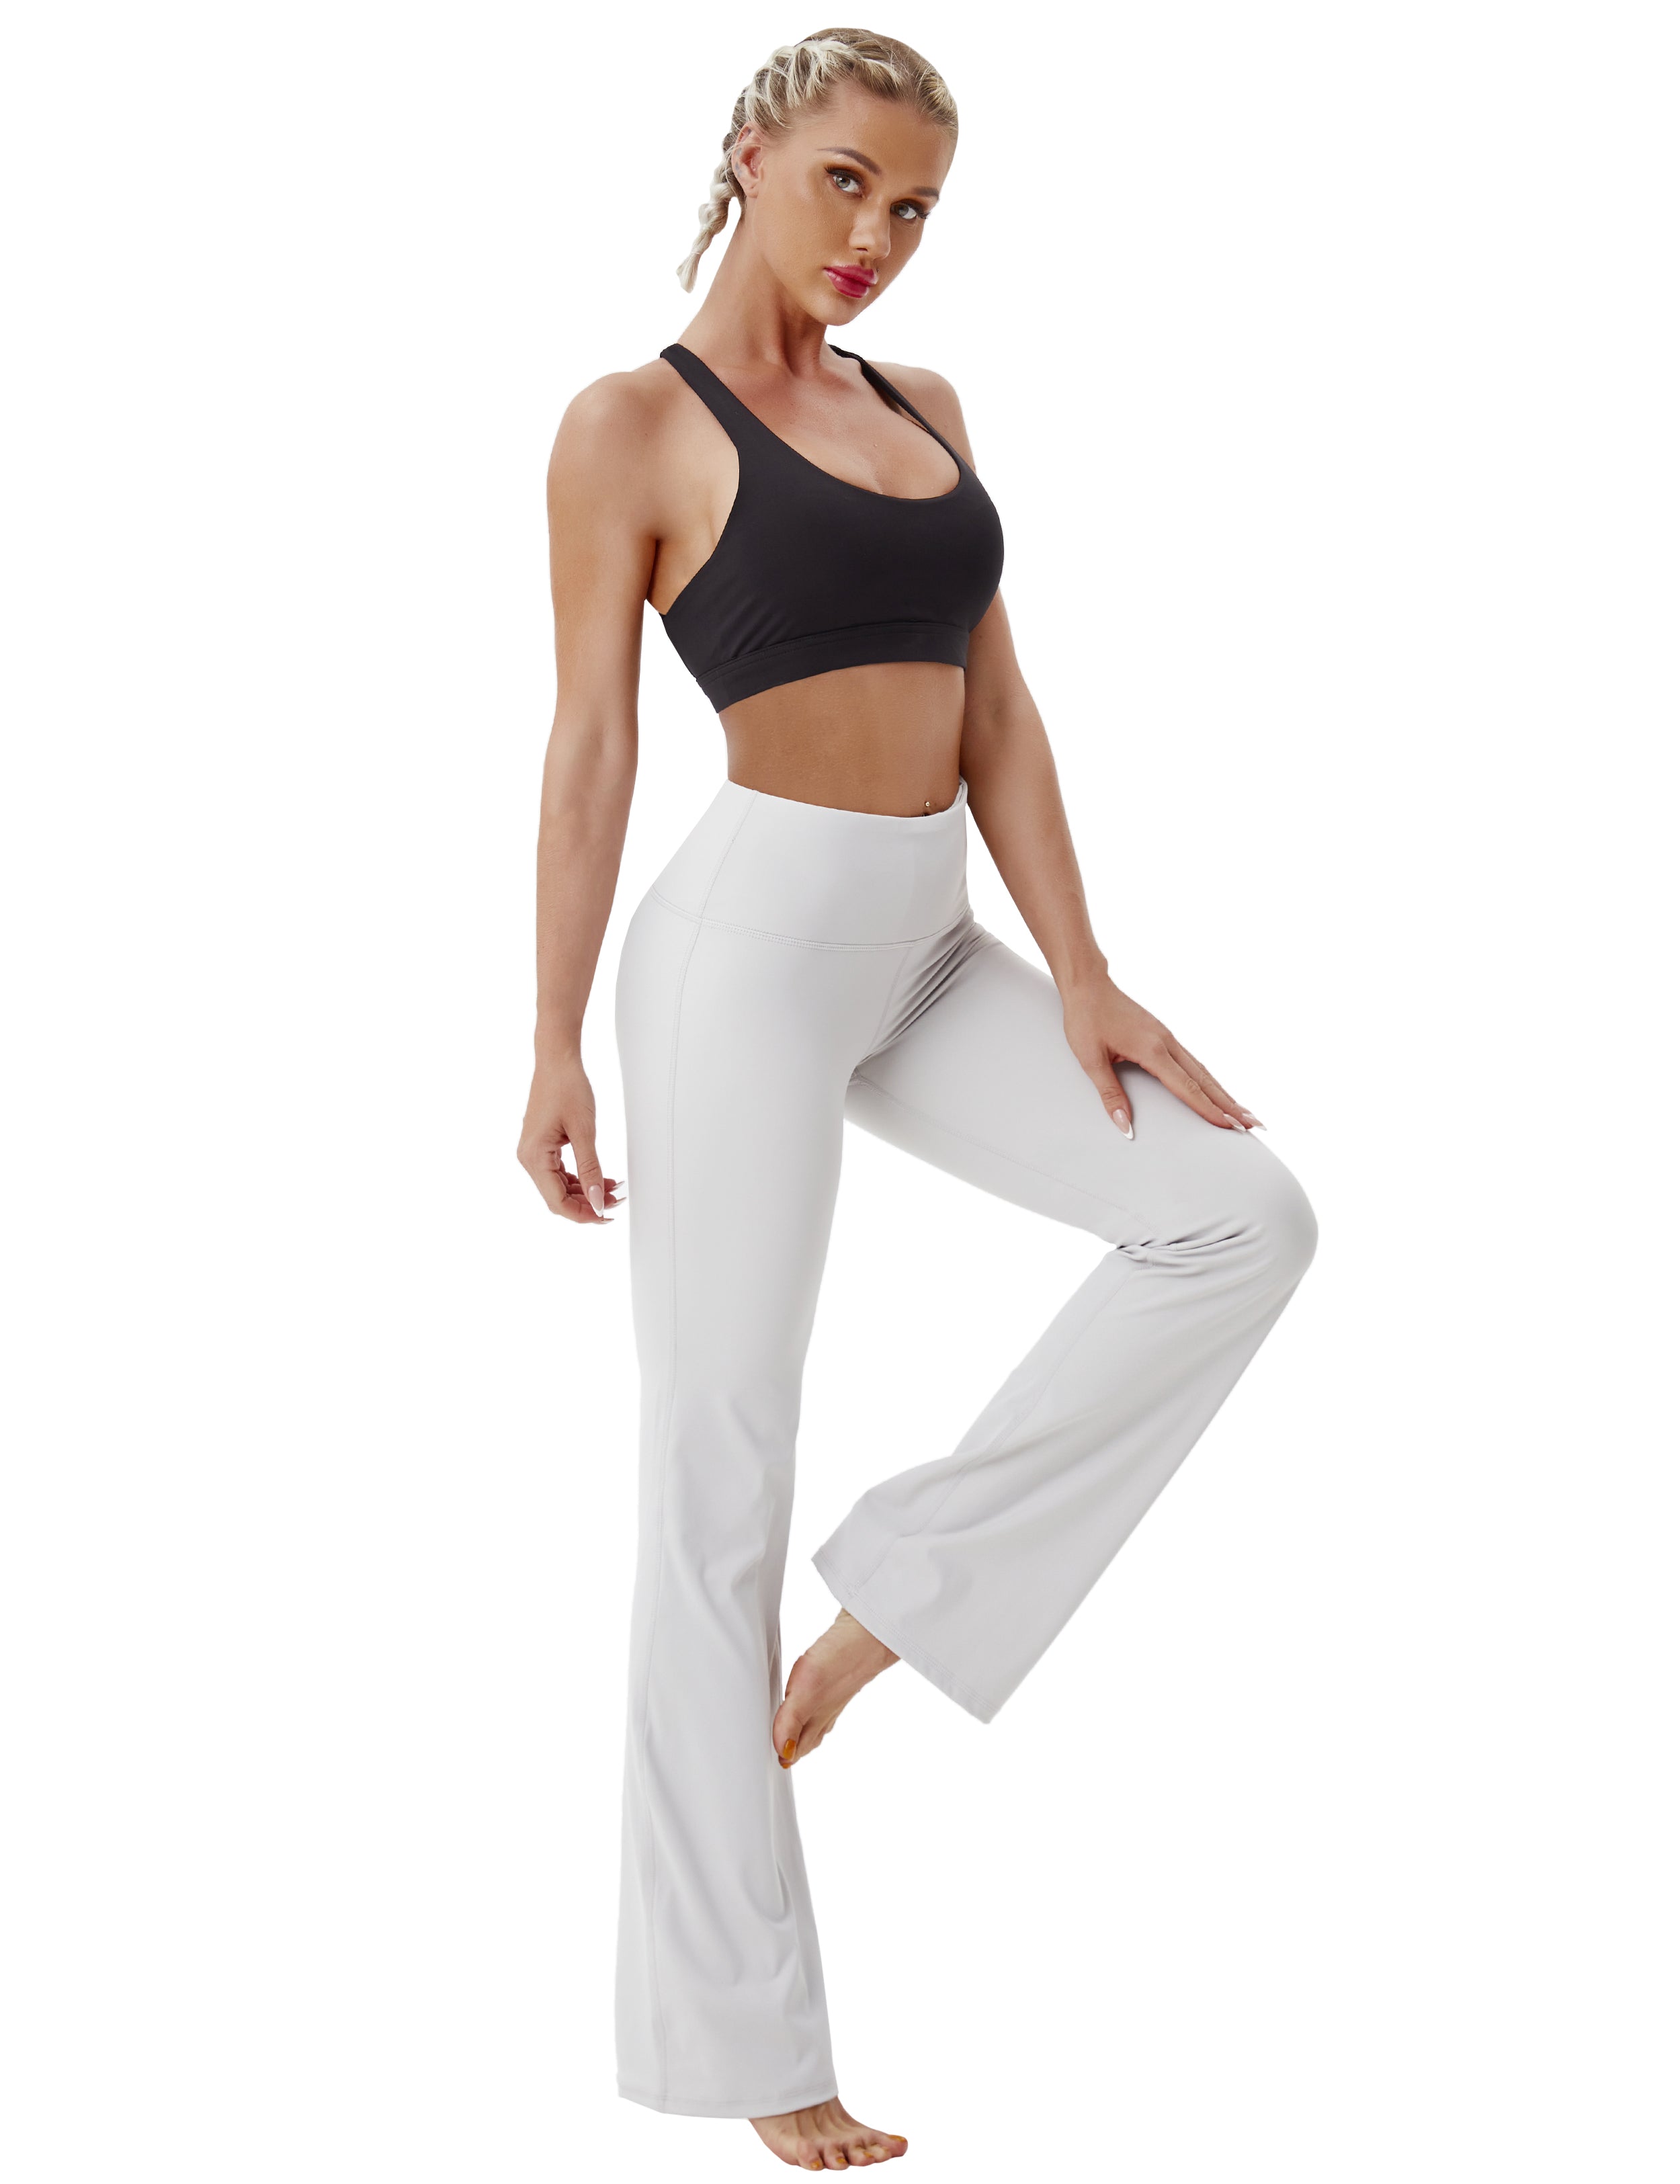 High Waist Bootcut Leggings Lightgray 75%Nylon/25%Spandex Fabric doesn't attract lint easily 4-way stretch No see-through Moisture-wicking Tummy control Inner pocket Five lengths